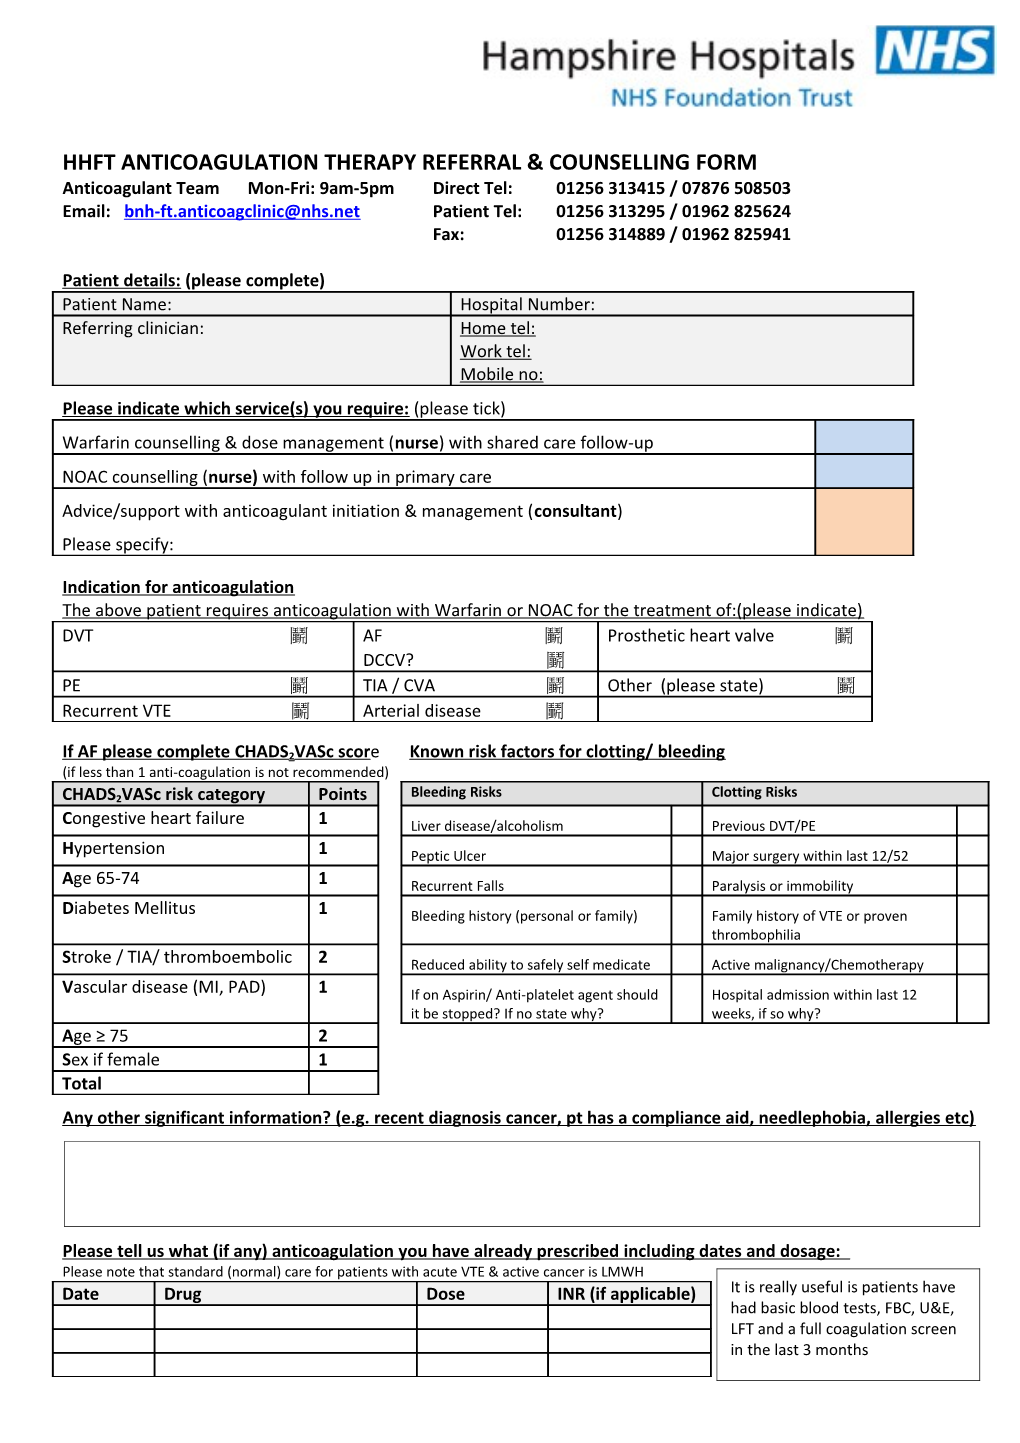 Hhft Anticoagulation Therapy Referral & Counselling Form